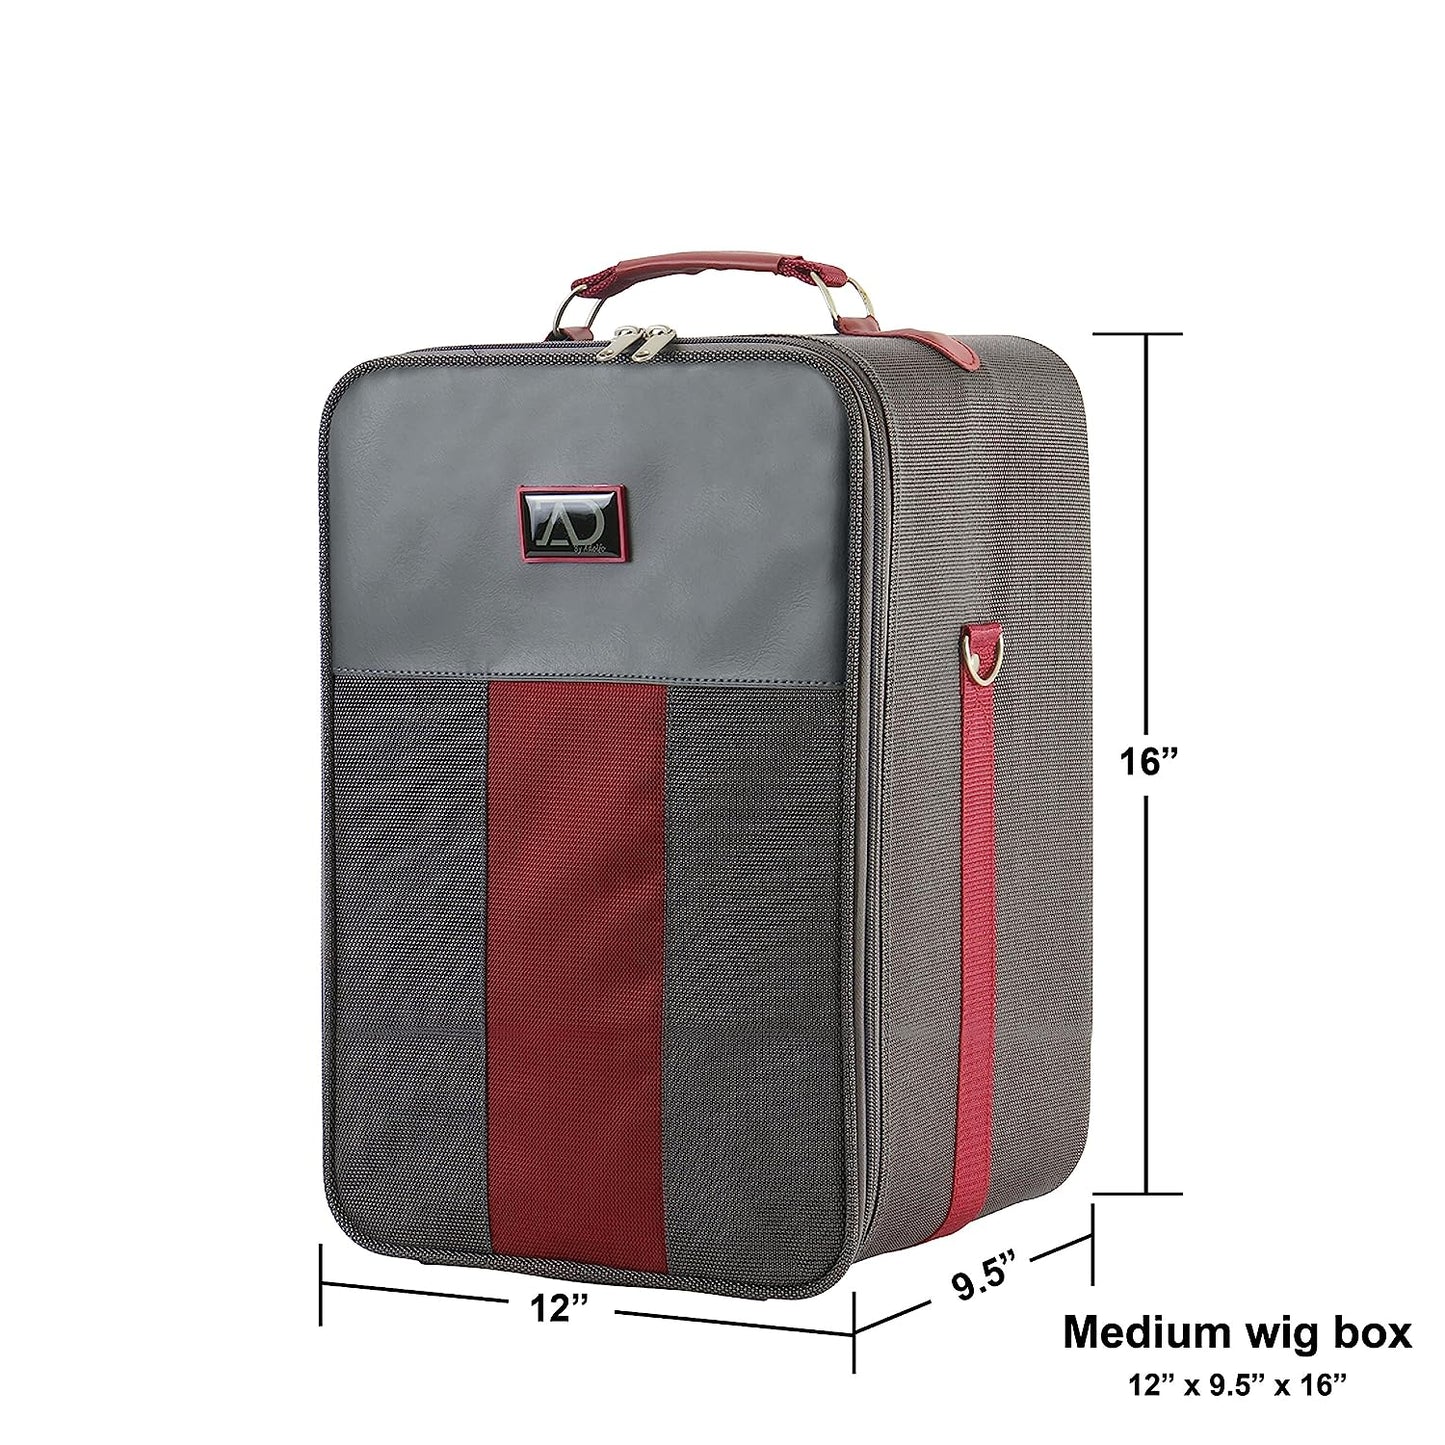 Medium Wig Travel Box with Top Handle, Shoulder Strap & Double Zipper, Carrying Case with Removable Head-Holding Base - Gray & Maroon